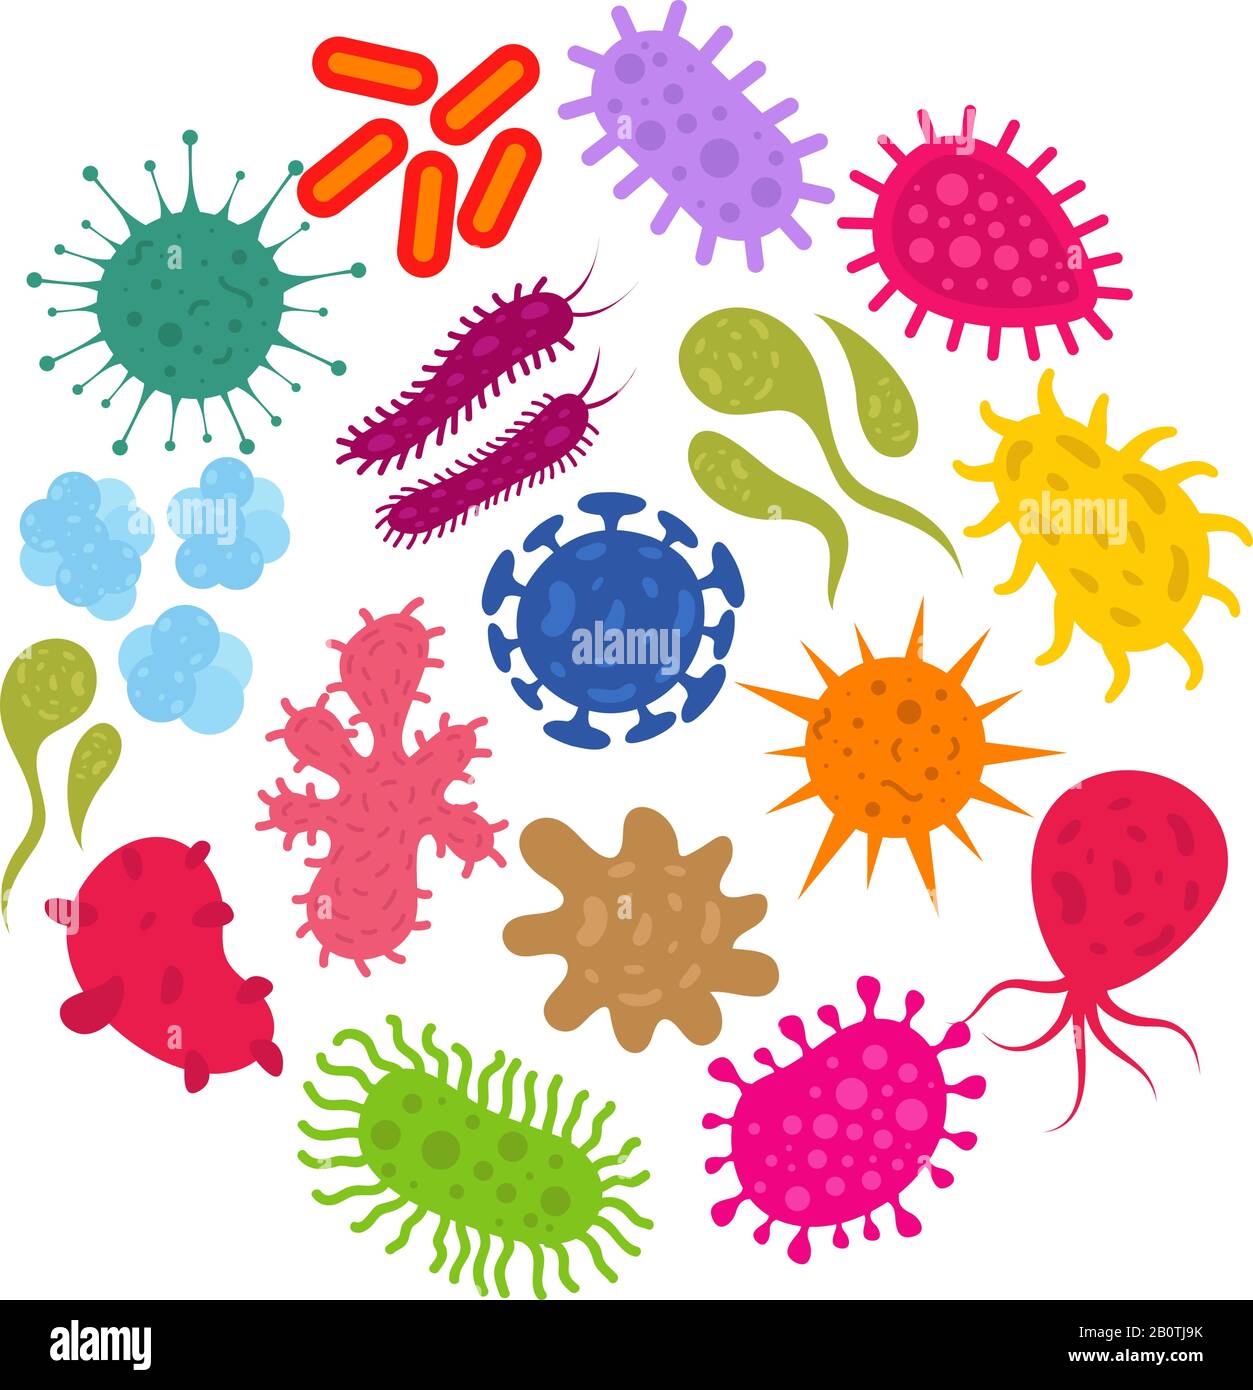 Microorganism and primitive infection virus. Bacteria and germs vector icons. Virus infection, illustration of microorganism bacteria Stock Vector